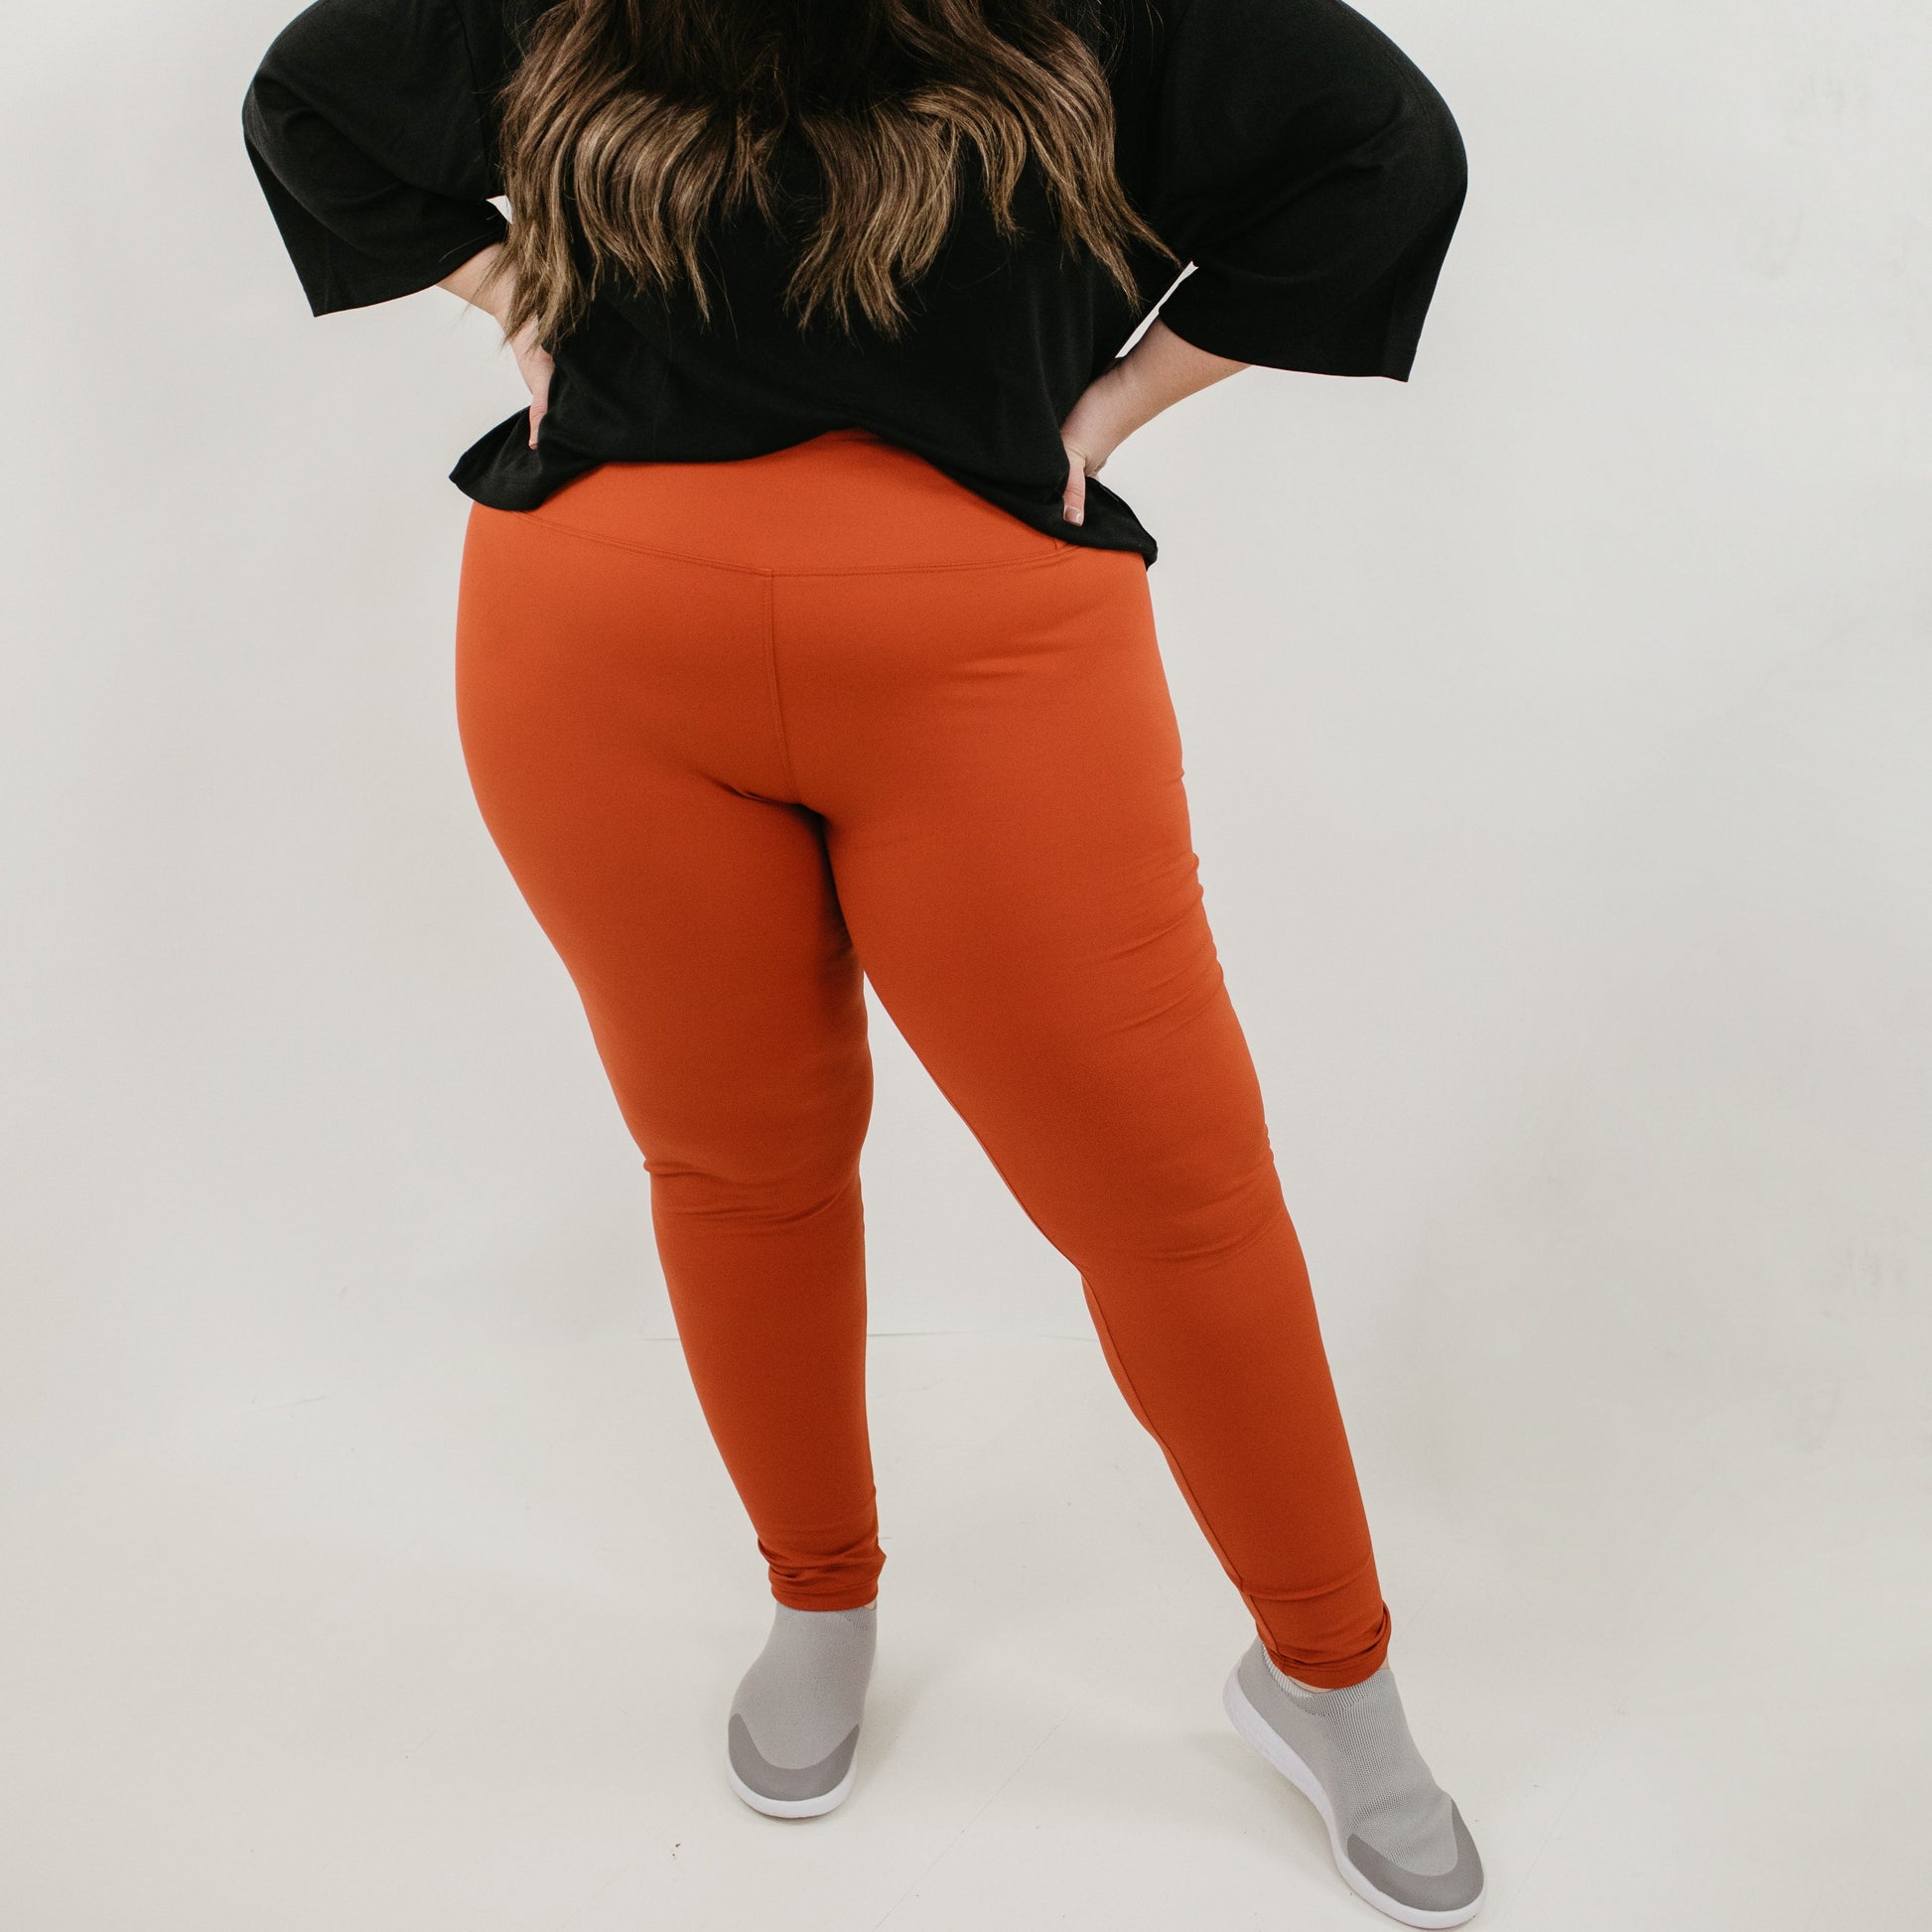 Happy.angel Plus Size Leggings with Pockets for Women, High - Import It All